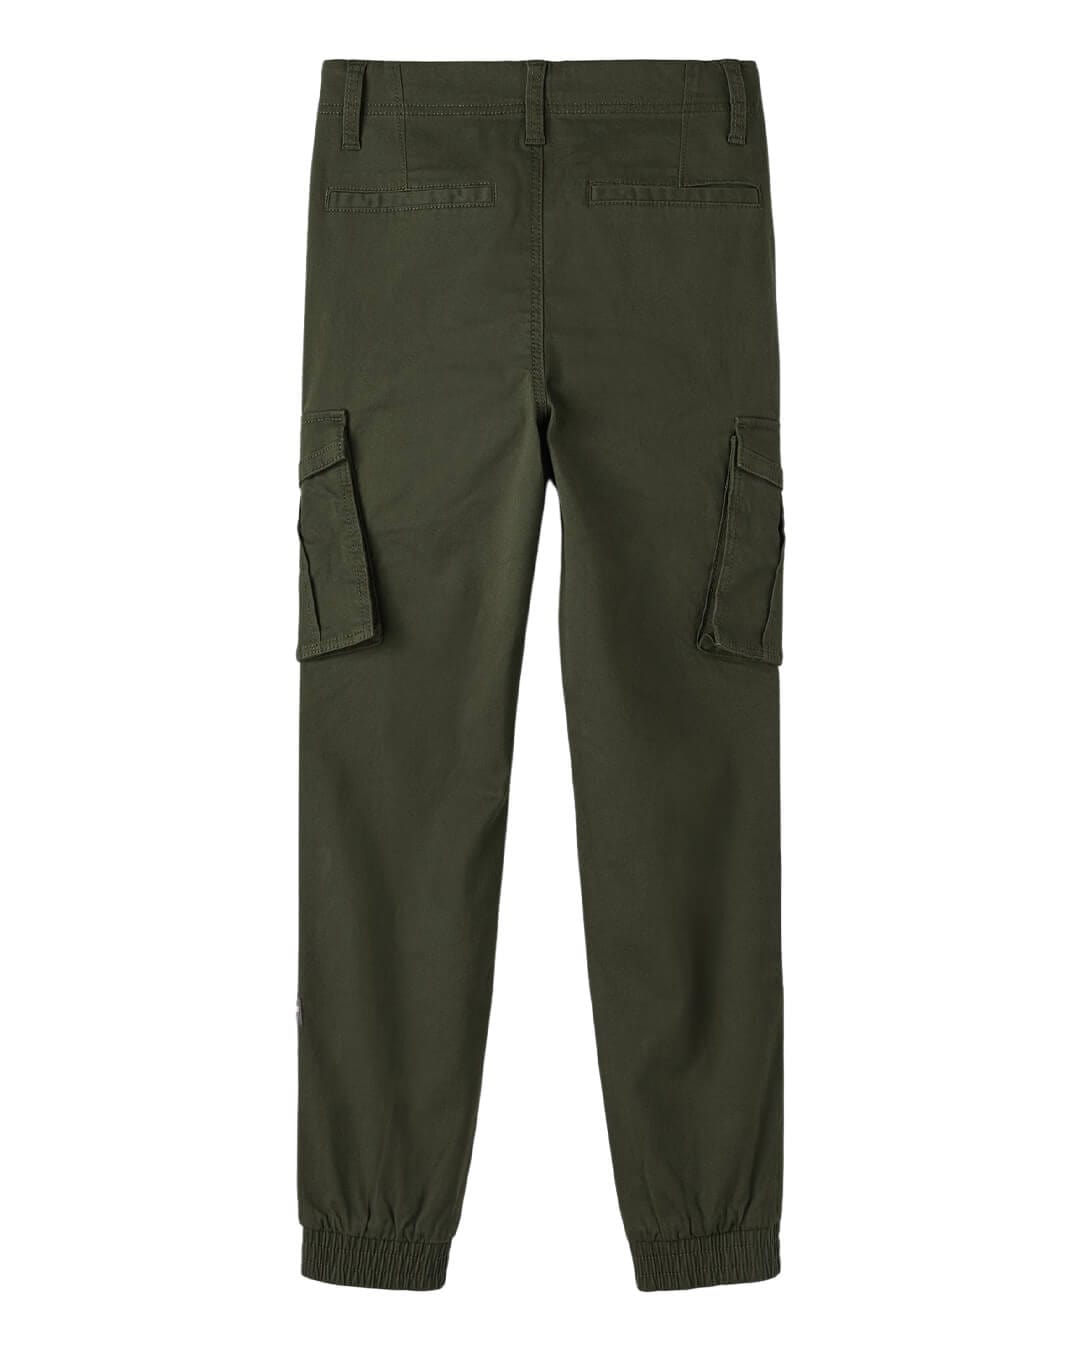 Name It Trousers Name It Rosin Green Cargo Trousers